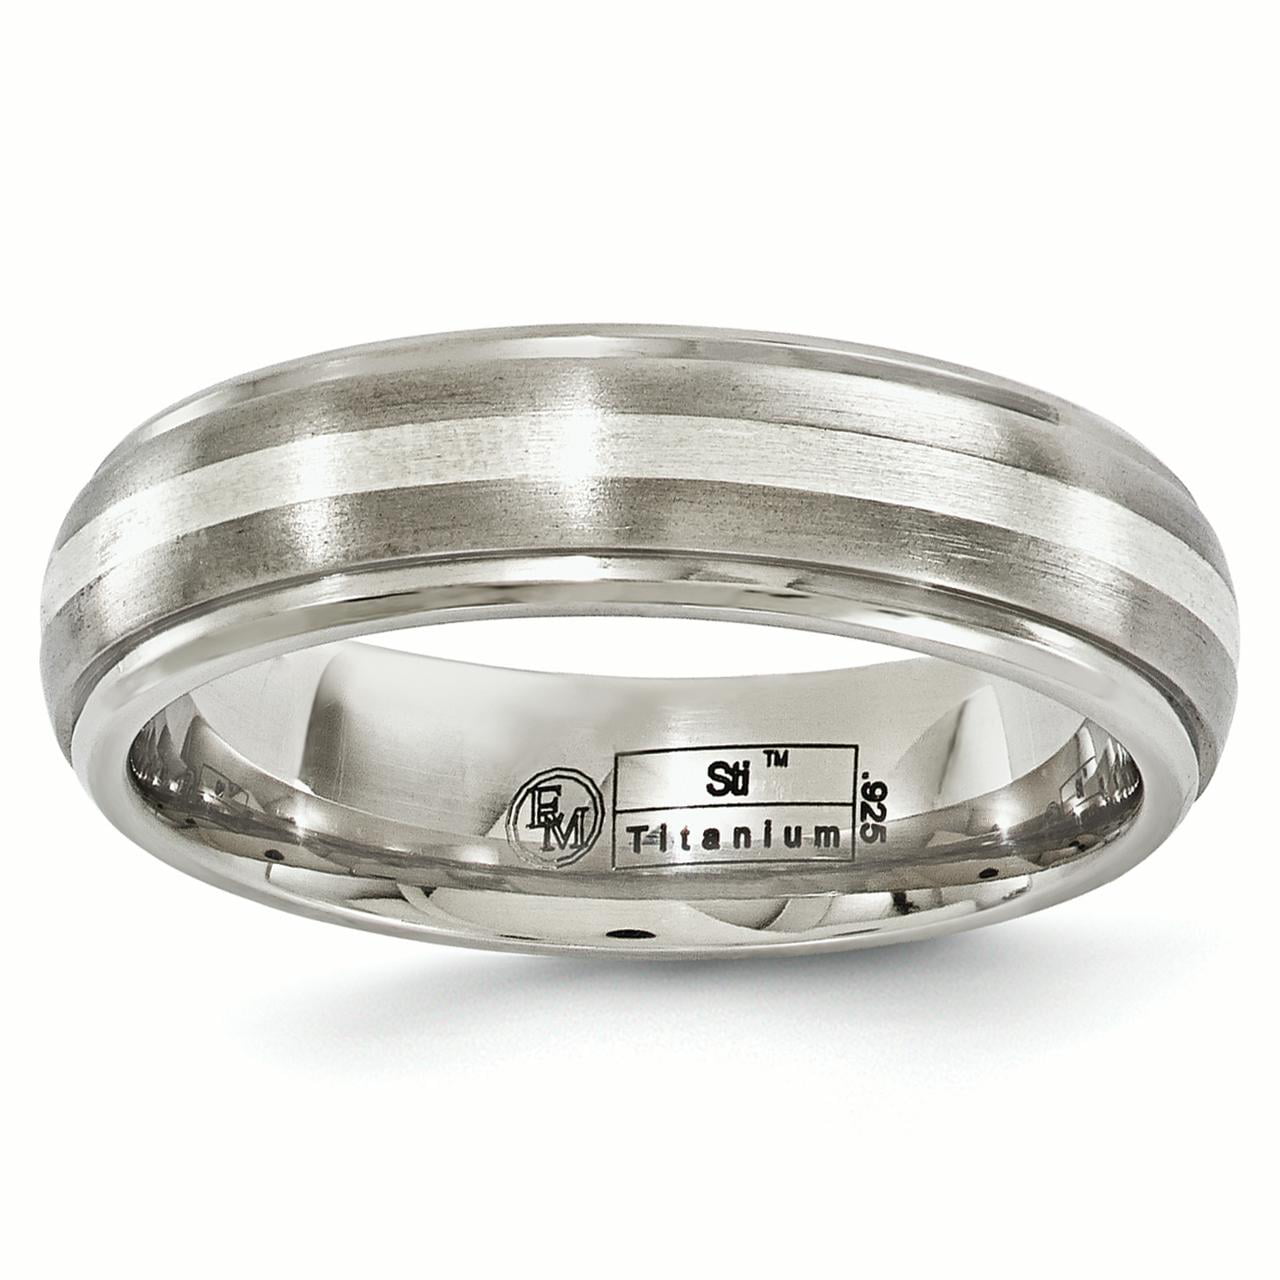 Jewelry Stores Network Mens Titanium Flat 6mm Sterling Silver Inlay Brushed Wedding Band Ring